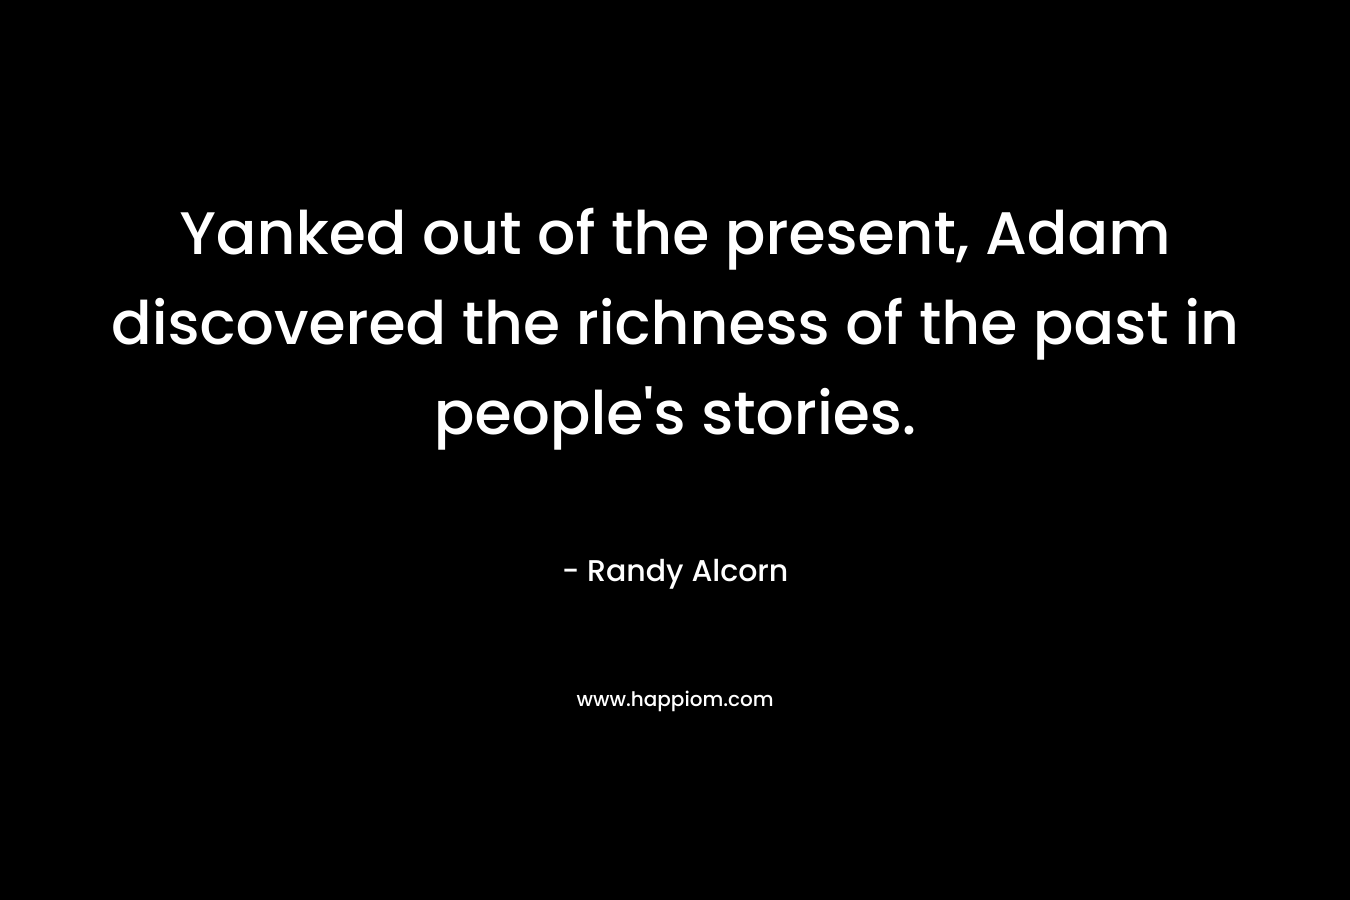 Yanked out of the present, Adam discovered the richness of the past in people’s stories. – Randy Alcorn